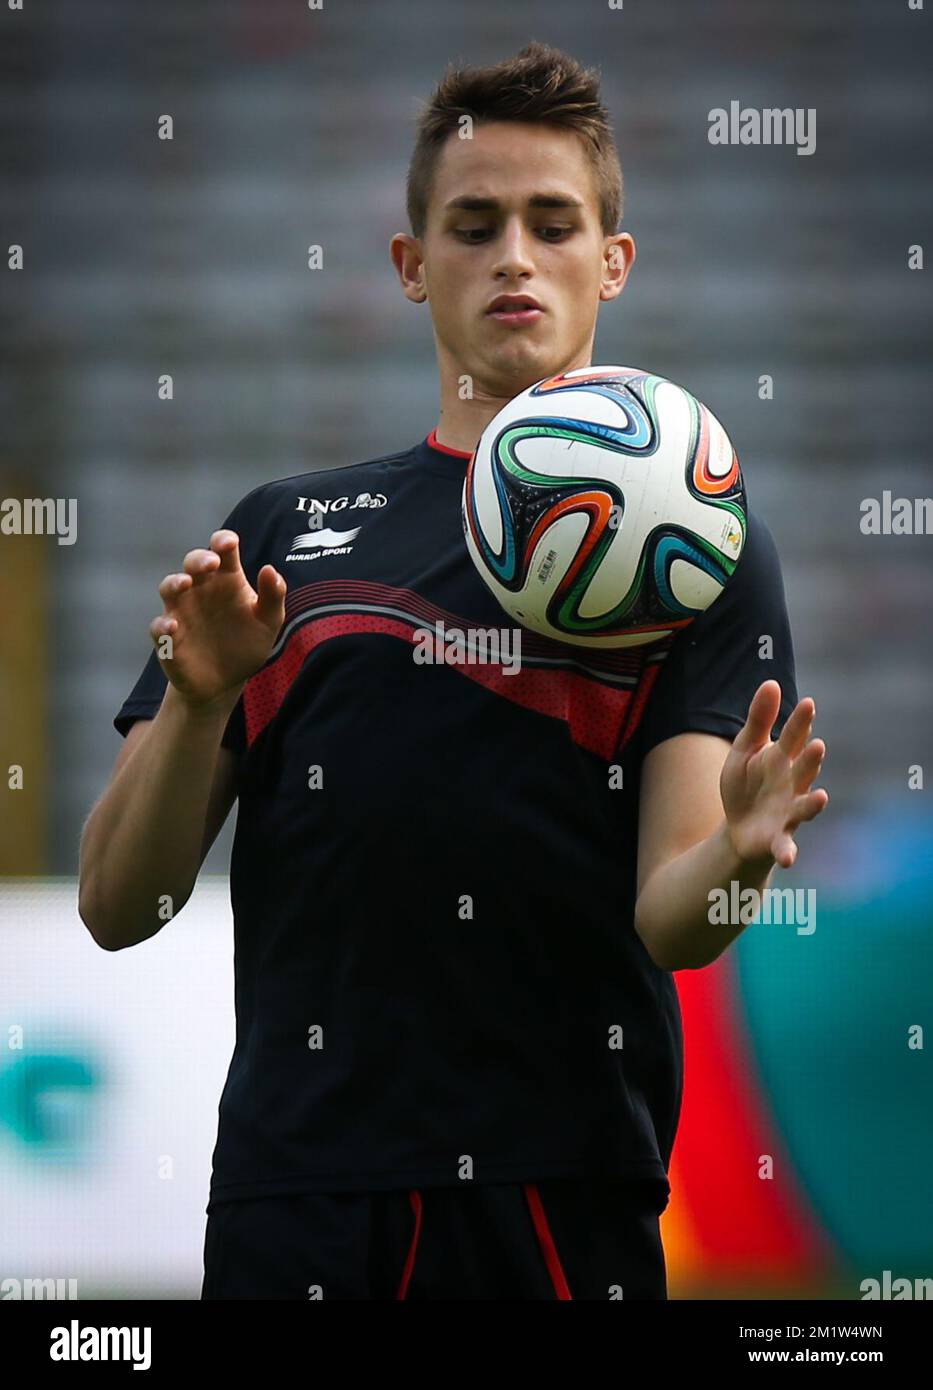 Belgium's Adnan Januzaj pictured in action during the last training session of the Belgian national soccer team Red Devils before their departure to the World Cup in Brazil, on Sunday 08 June 2014, in Brussels. The 2014 Fifa World Cup takes place from 12 June till 13 July in Brazil. BELGA PHOTO VIRGINIE LEFOUR Stock Photo